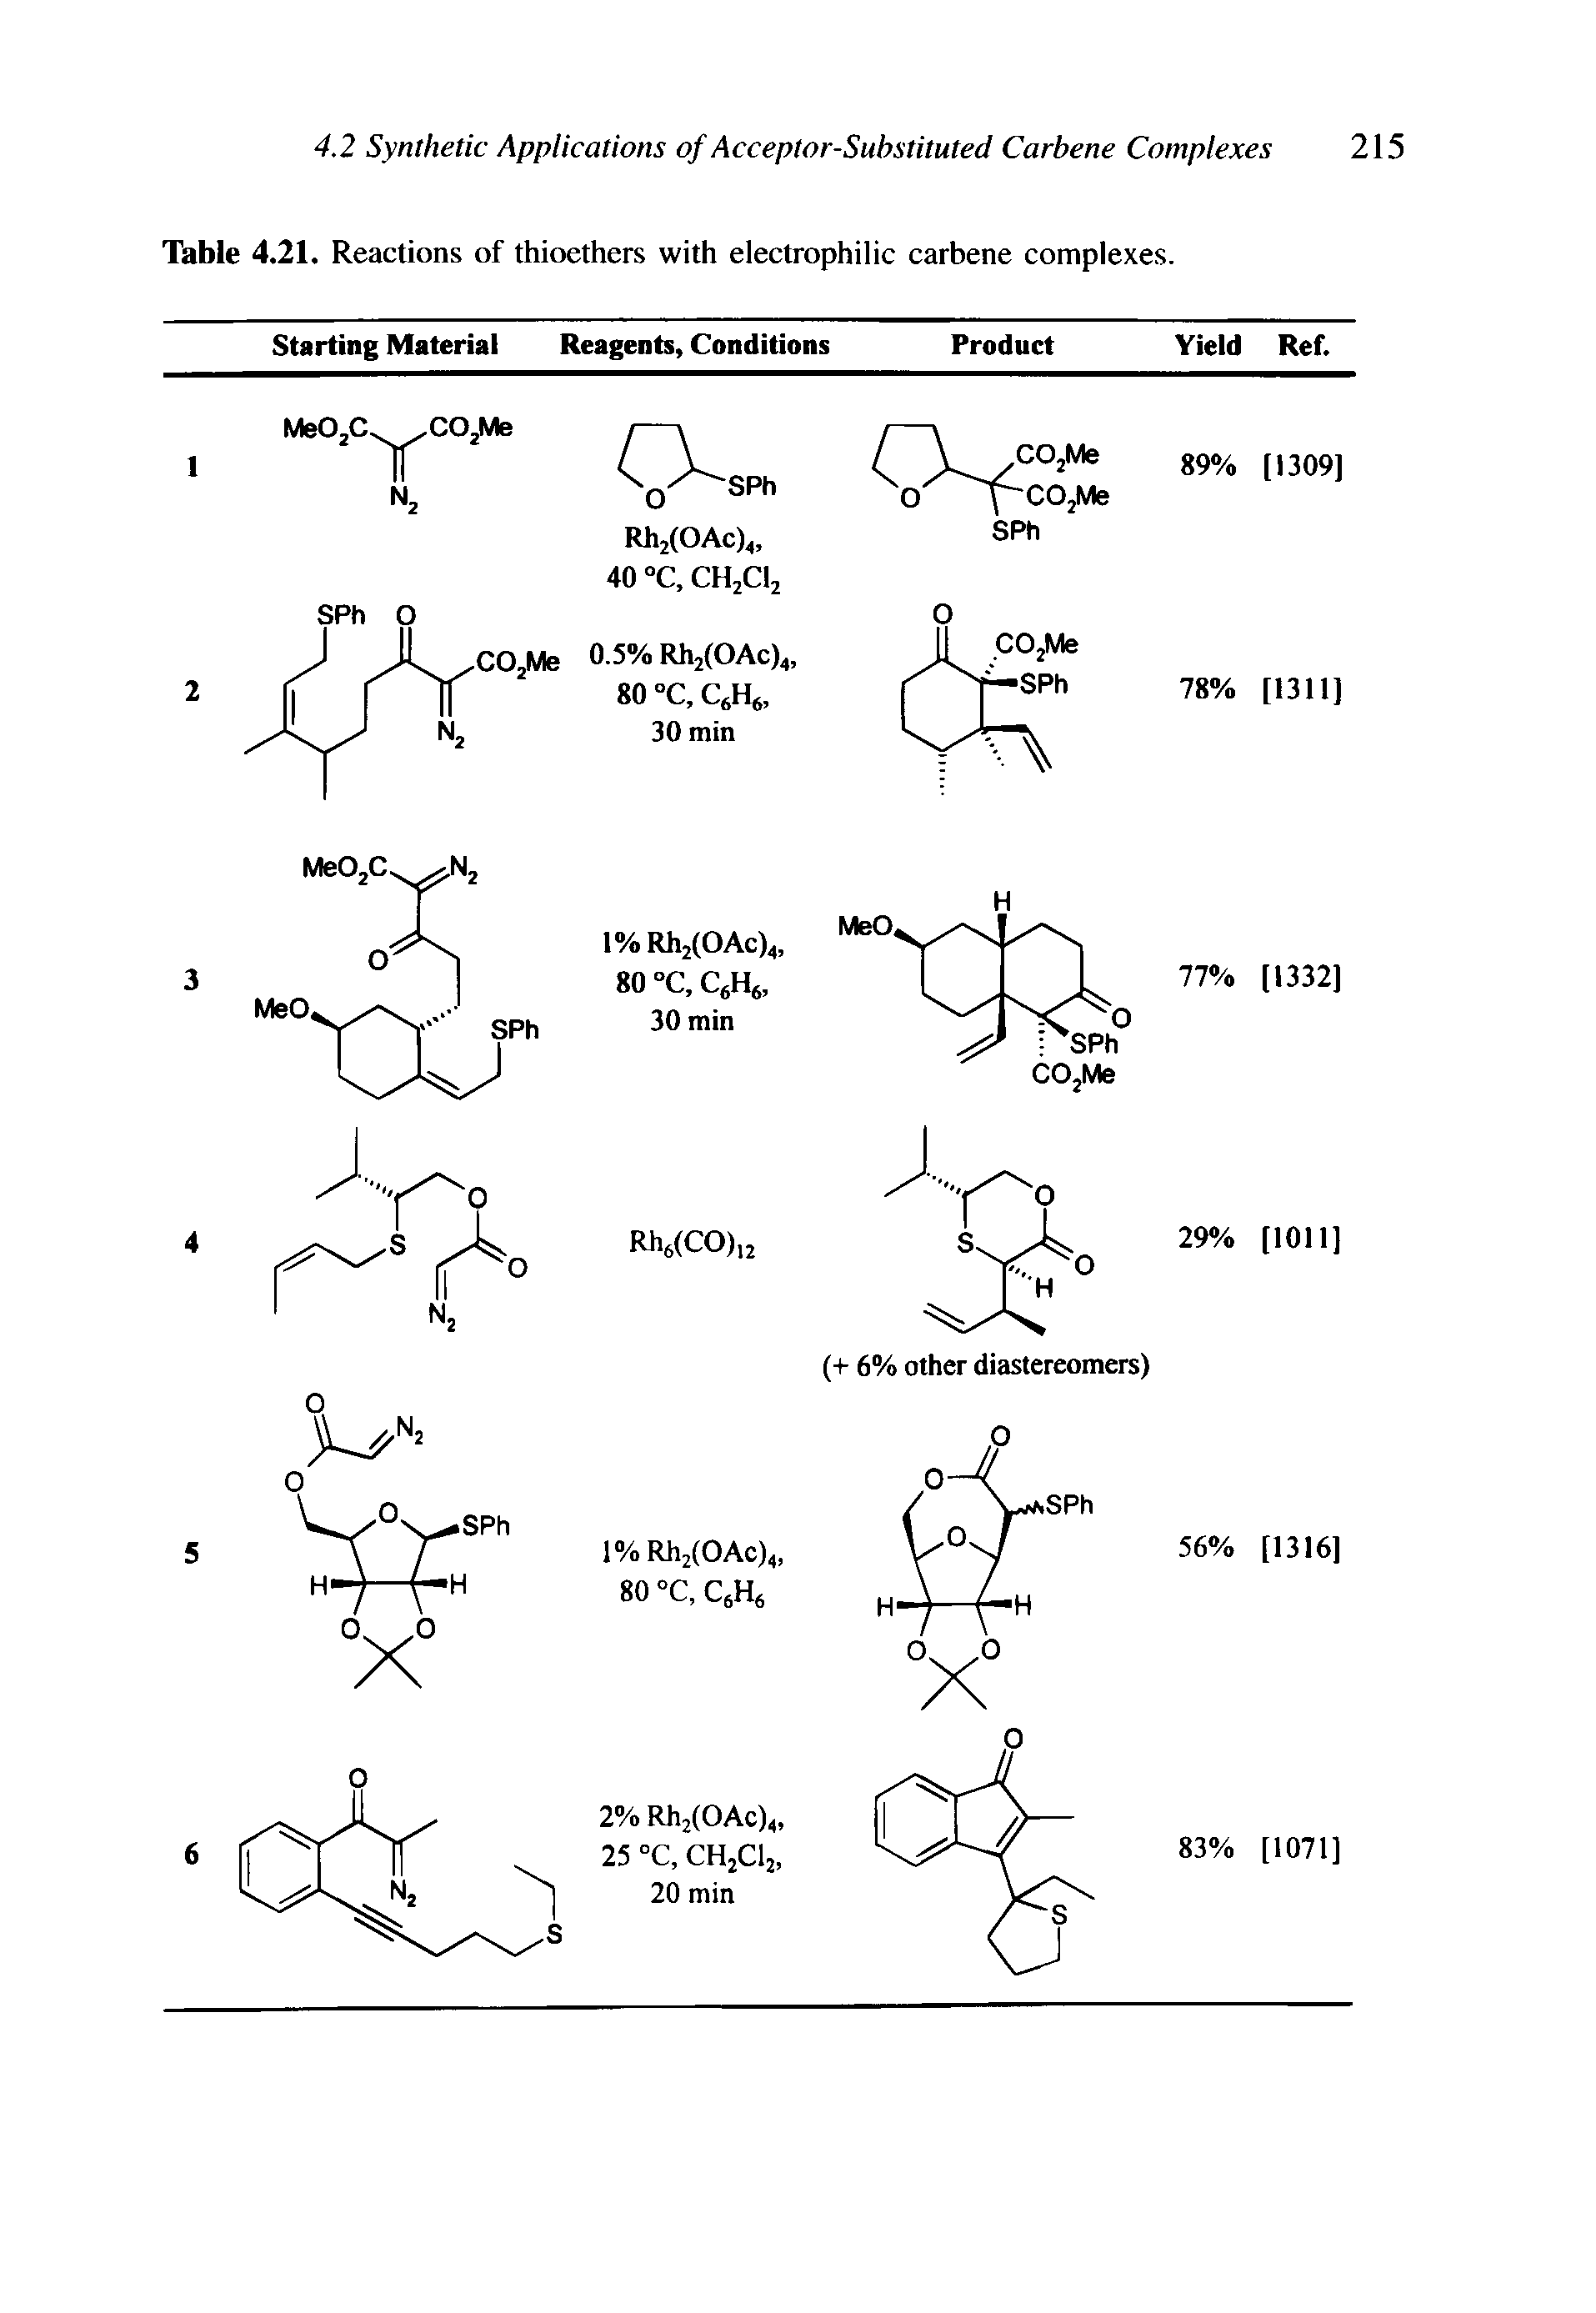 Table 4.21. Reactions of thioethers with electrophilic carbene complexes.